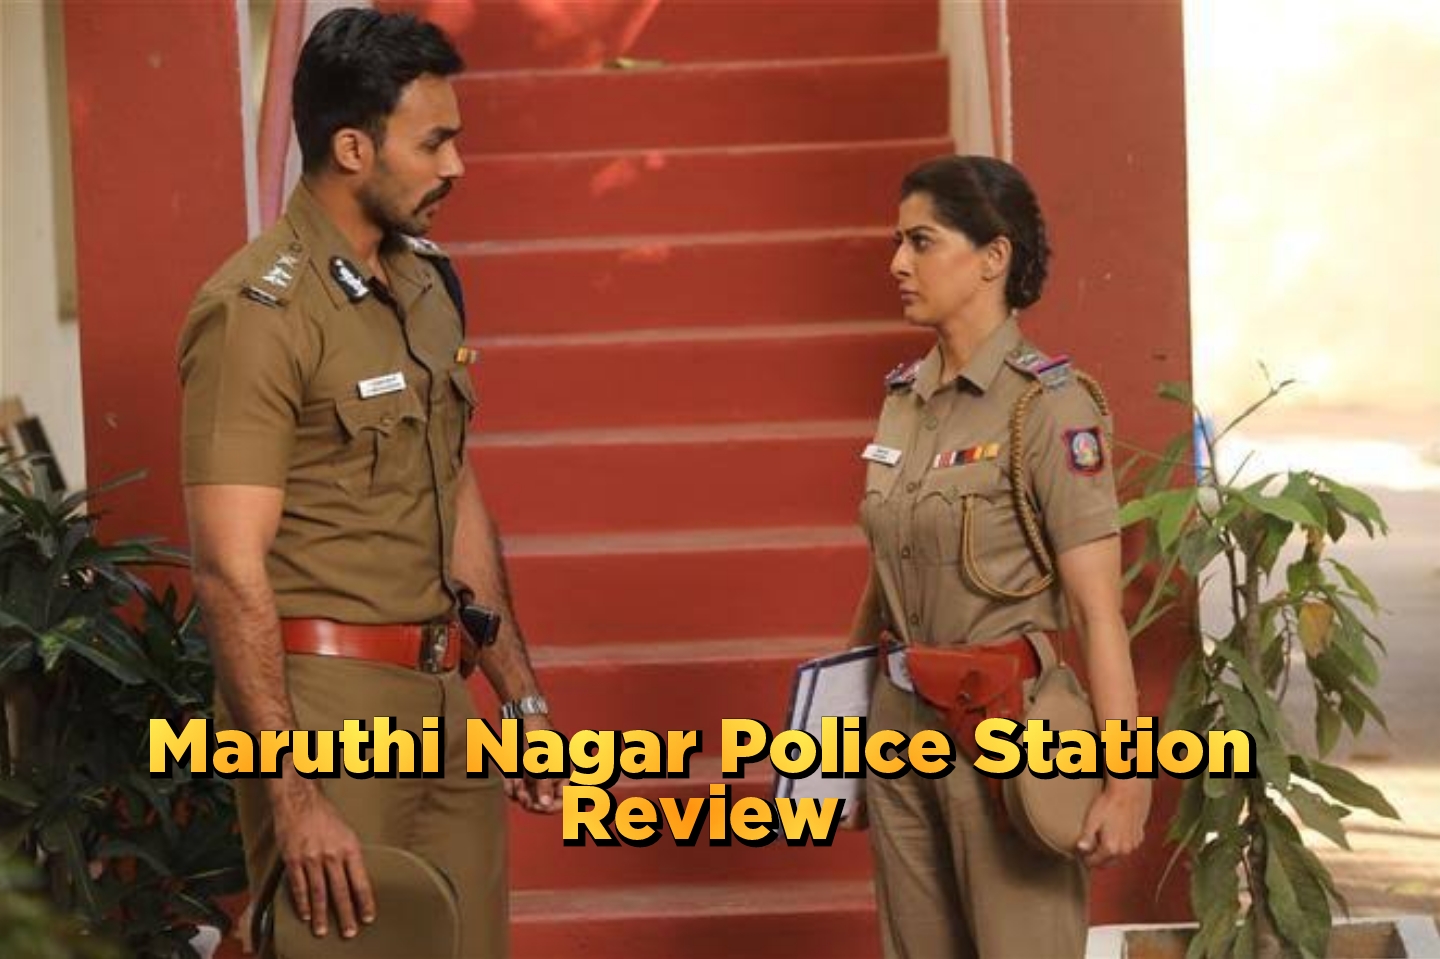 Maruthi Nagar Police Station Review: How is Maruthi Nagar Police Station Review – Varalakshmi Sarathkumar movie?